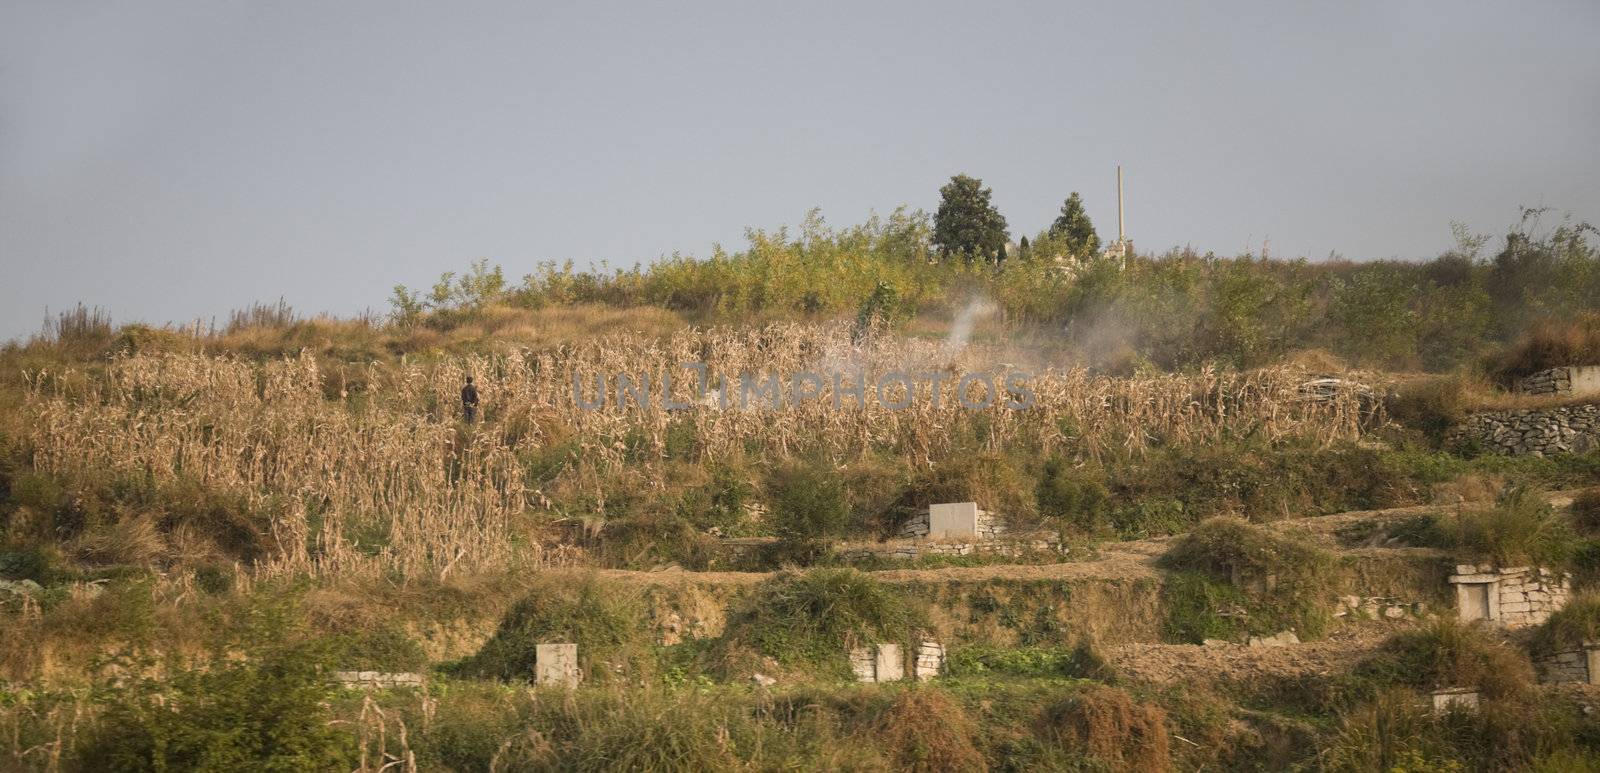 Peasants often bury their relatives in the fields in China.  Peasant is burning his fields in Guizhou China with graves of his relatives around him.